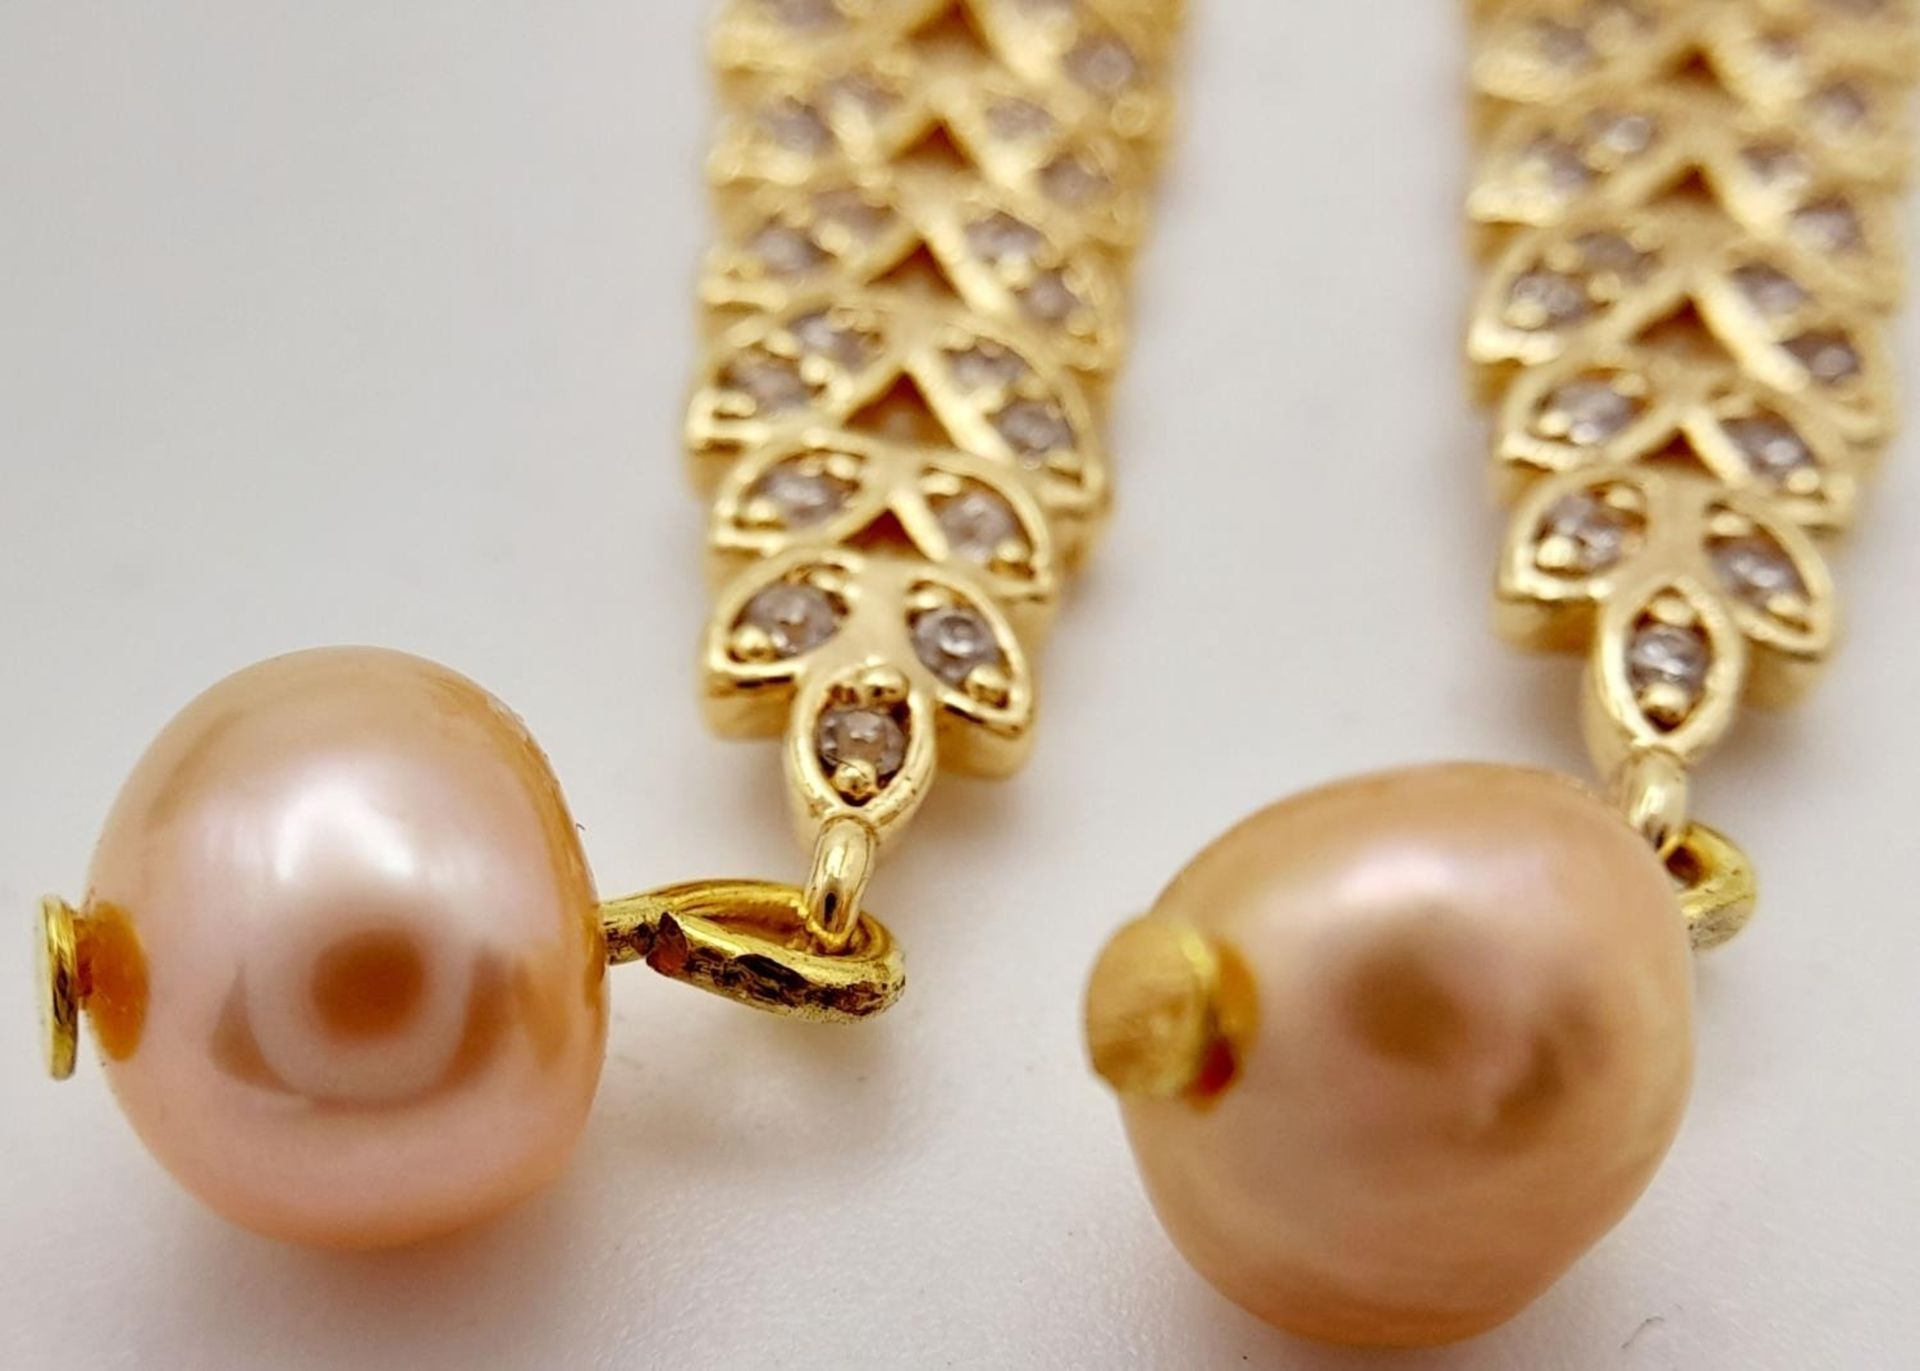 A fabulous gold-plated pair of earrings with cubic zirconia and pink cultured pearls, presented in a - Image 3 of 5